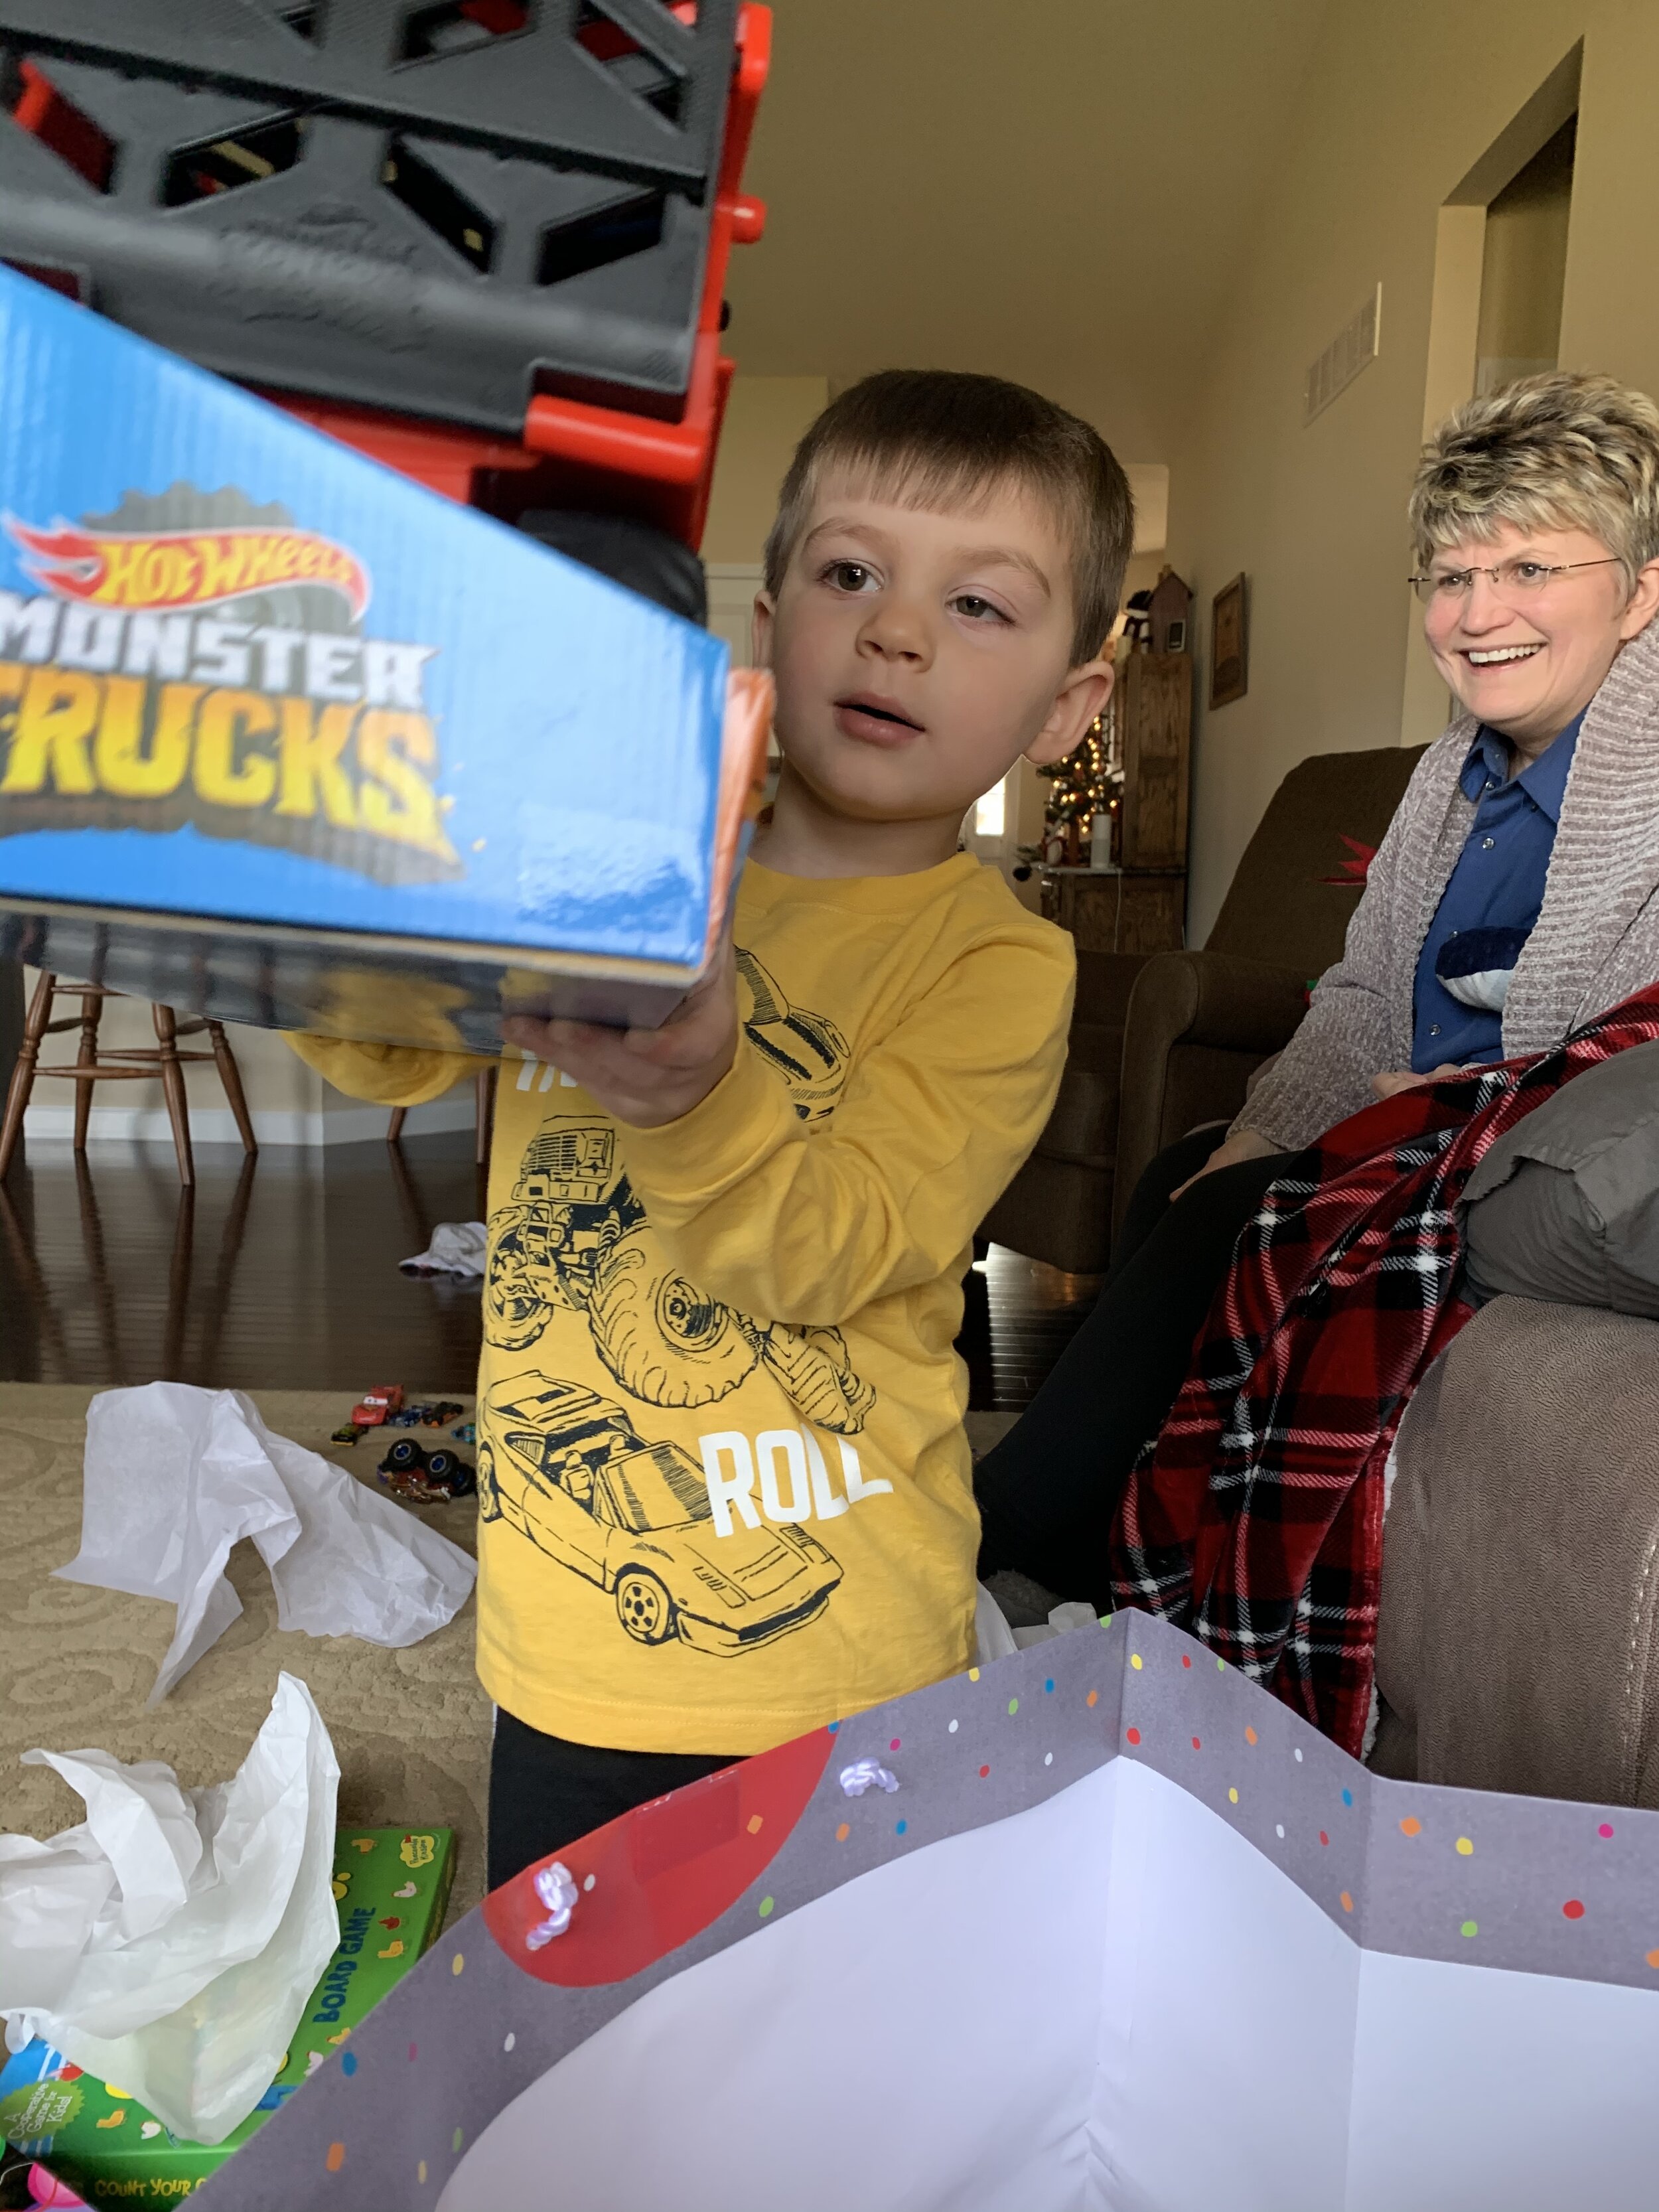  Finn was pretty excited about his new monster truck hauler. And I was thrilled to see him on his birthday. :) 